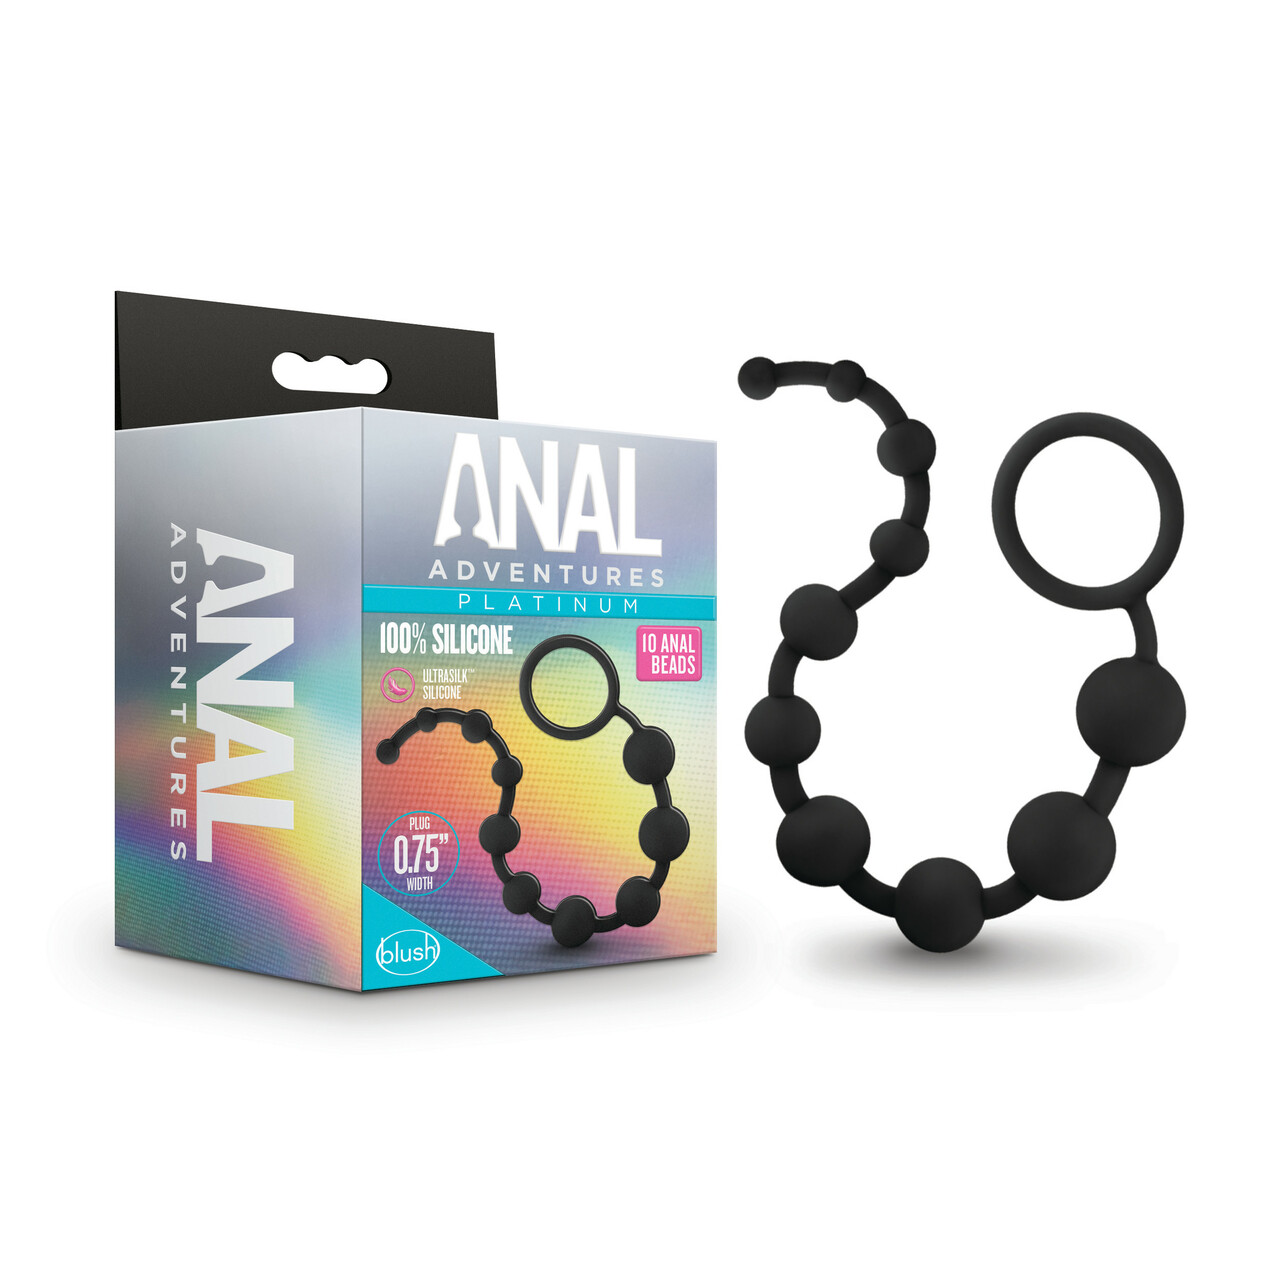 ANAL ADVENTURES PLATINUM SILICONE 10 ANAL BEADS BLACK - Click Image to Close